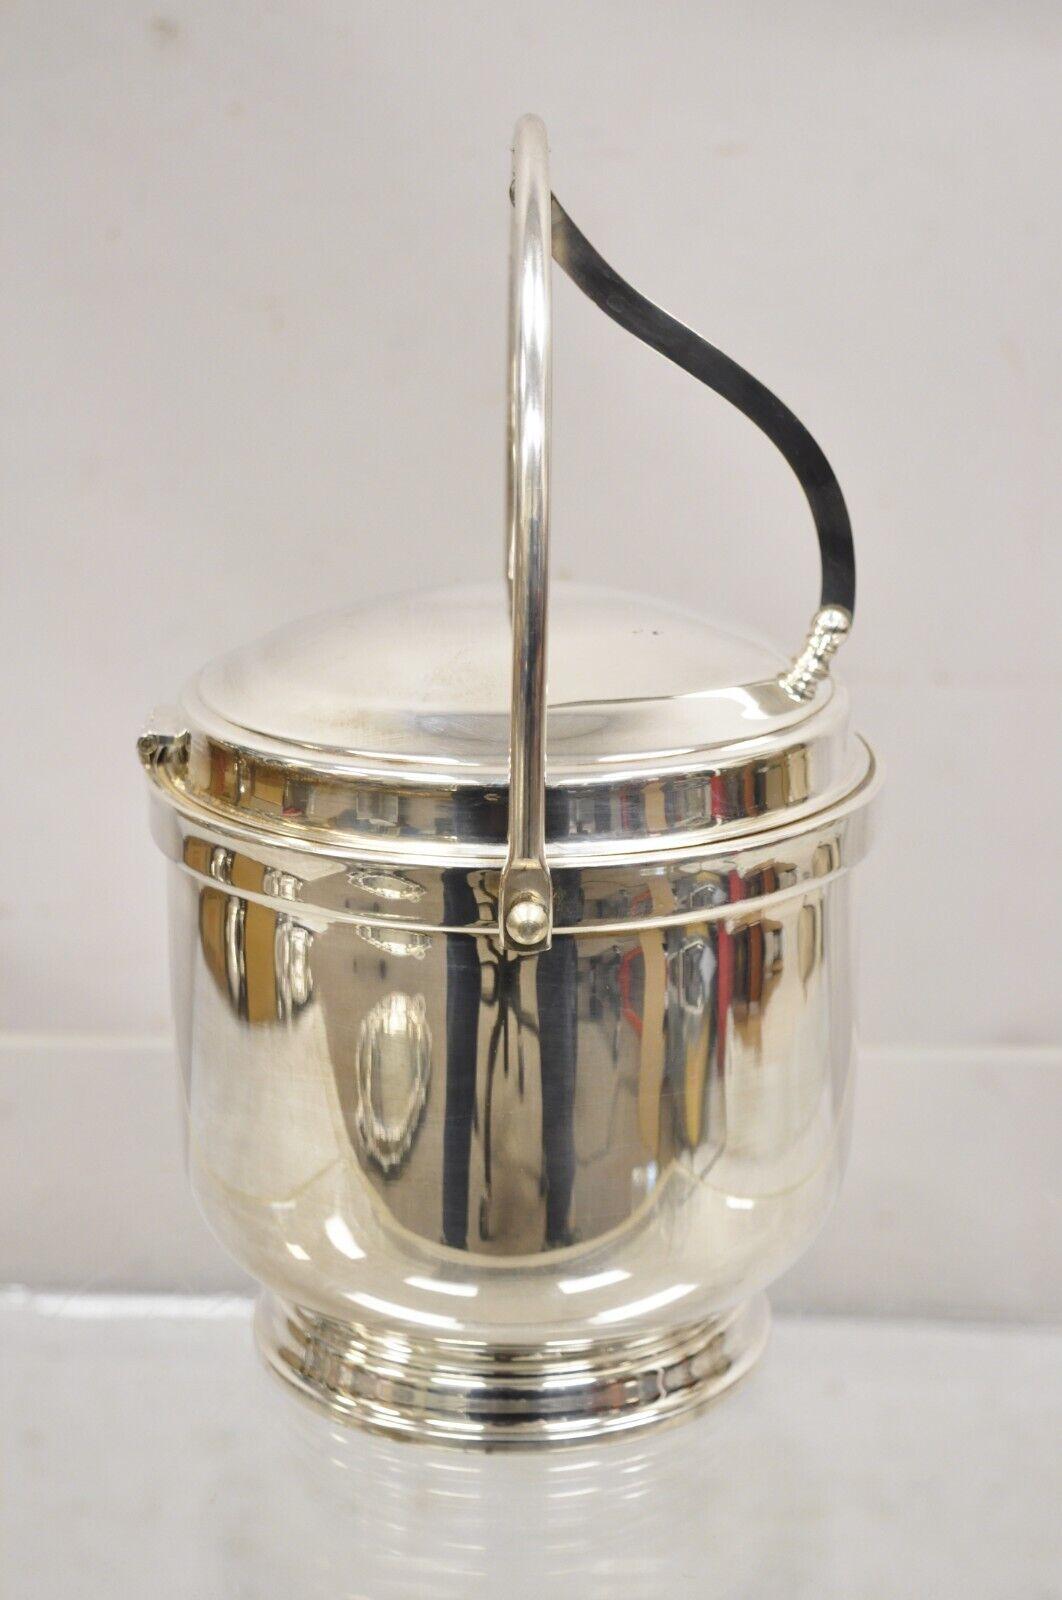 Vintage Wallace Mid Century Modern Silver Plated Hinged Lid Ice Bucket w glass liner. Circa Mid 20th Century.
Measurements: 12.5